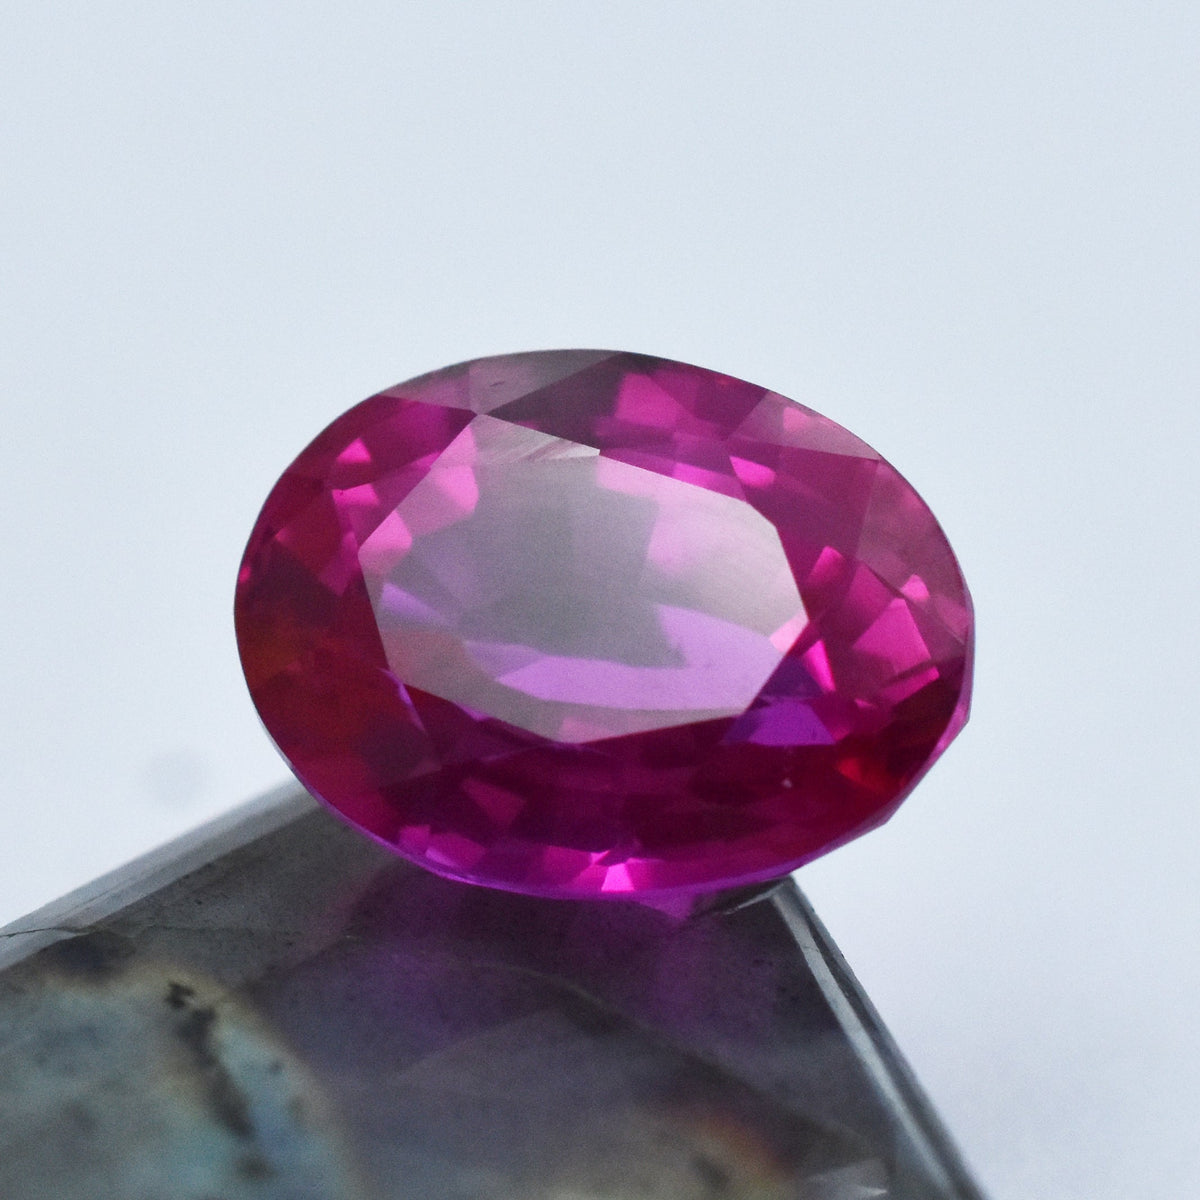 Certified Precious Rare Pink Ruby Flawless Loose Pink Ruby Gemstone Natural Pink Ruby Top Quality Pink Ruby Oval Shape 18.65 Ct Ruby